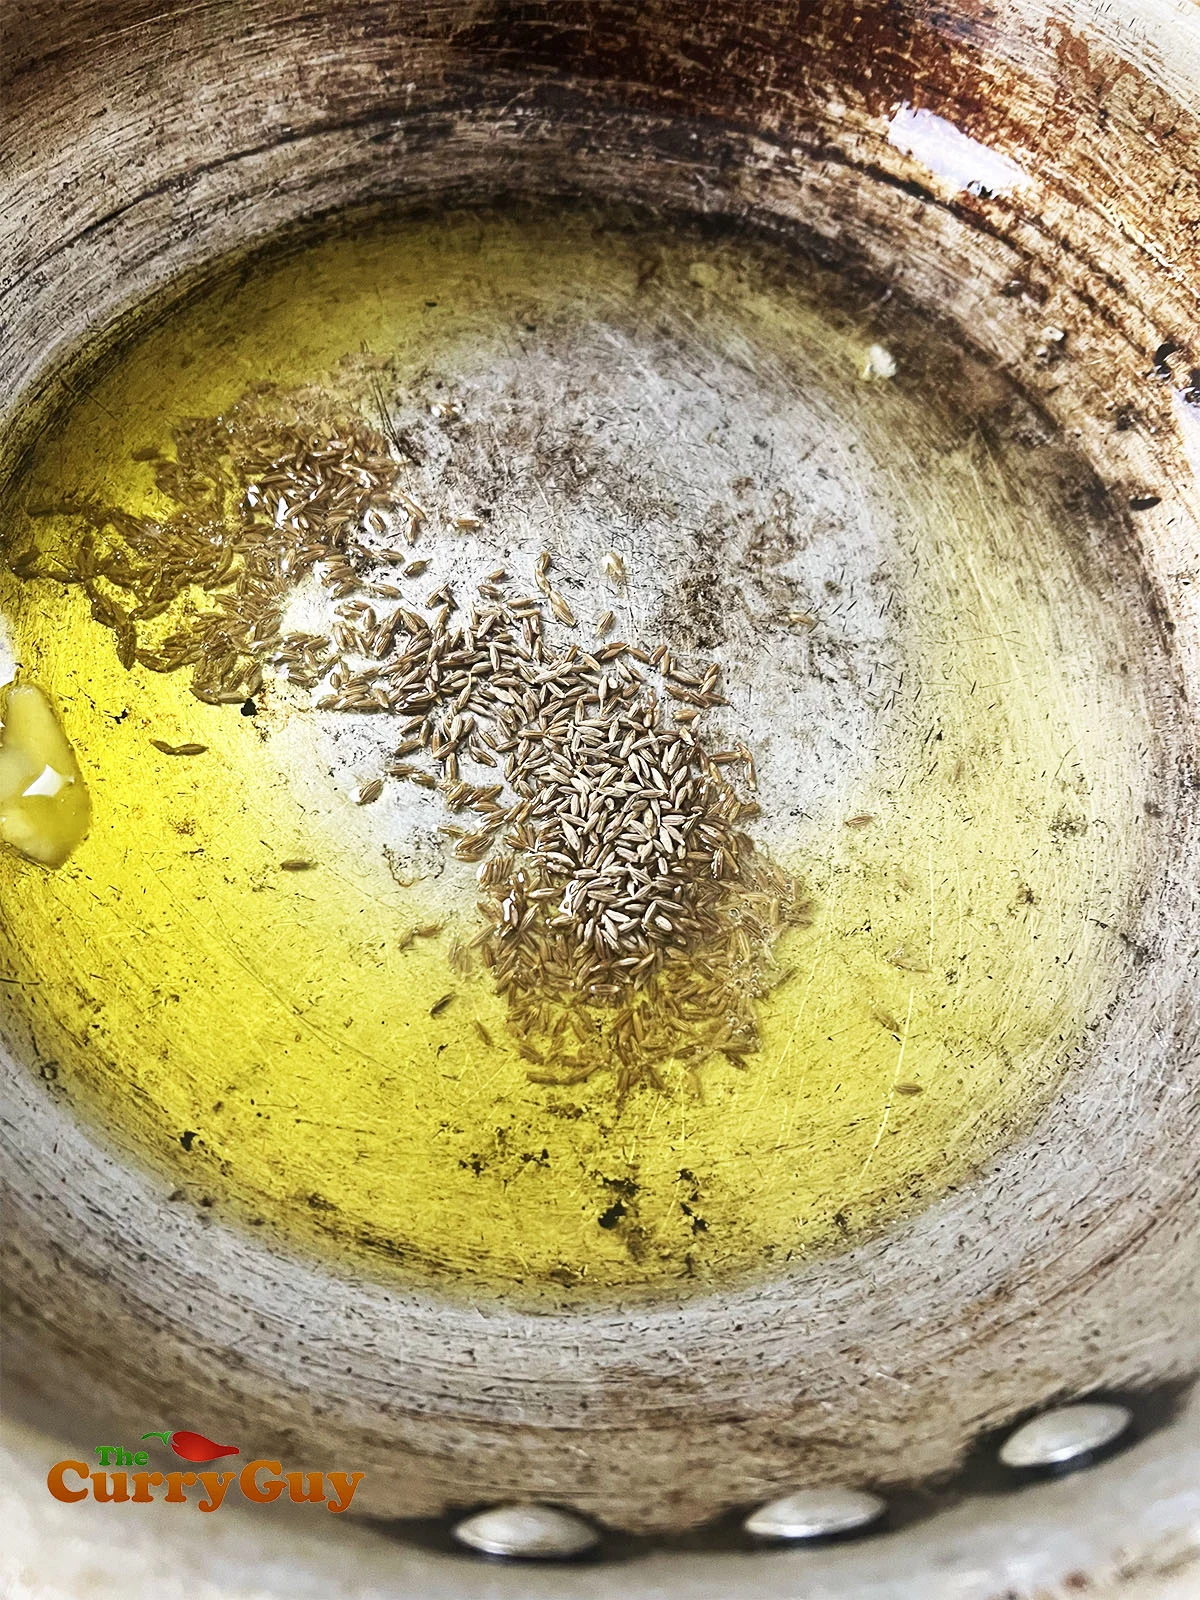 Adding the cumin seeds to the hot ghee